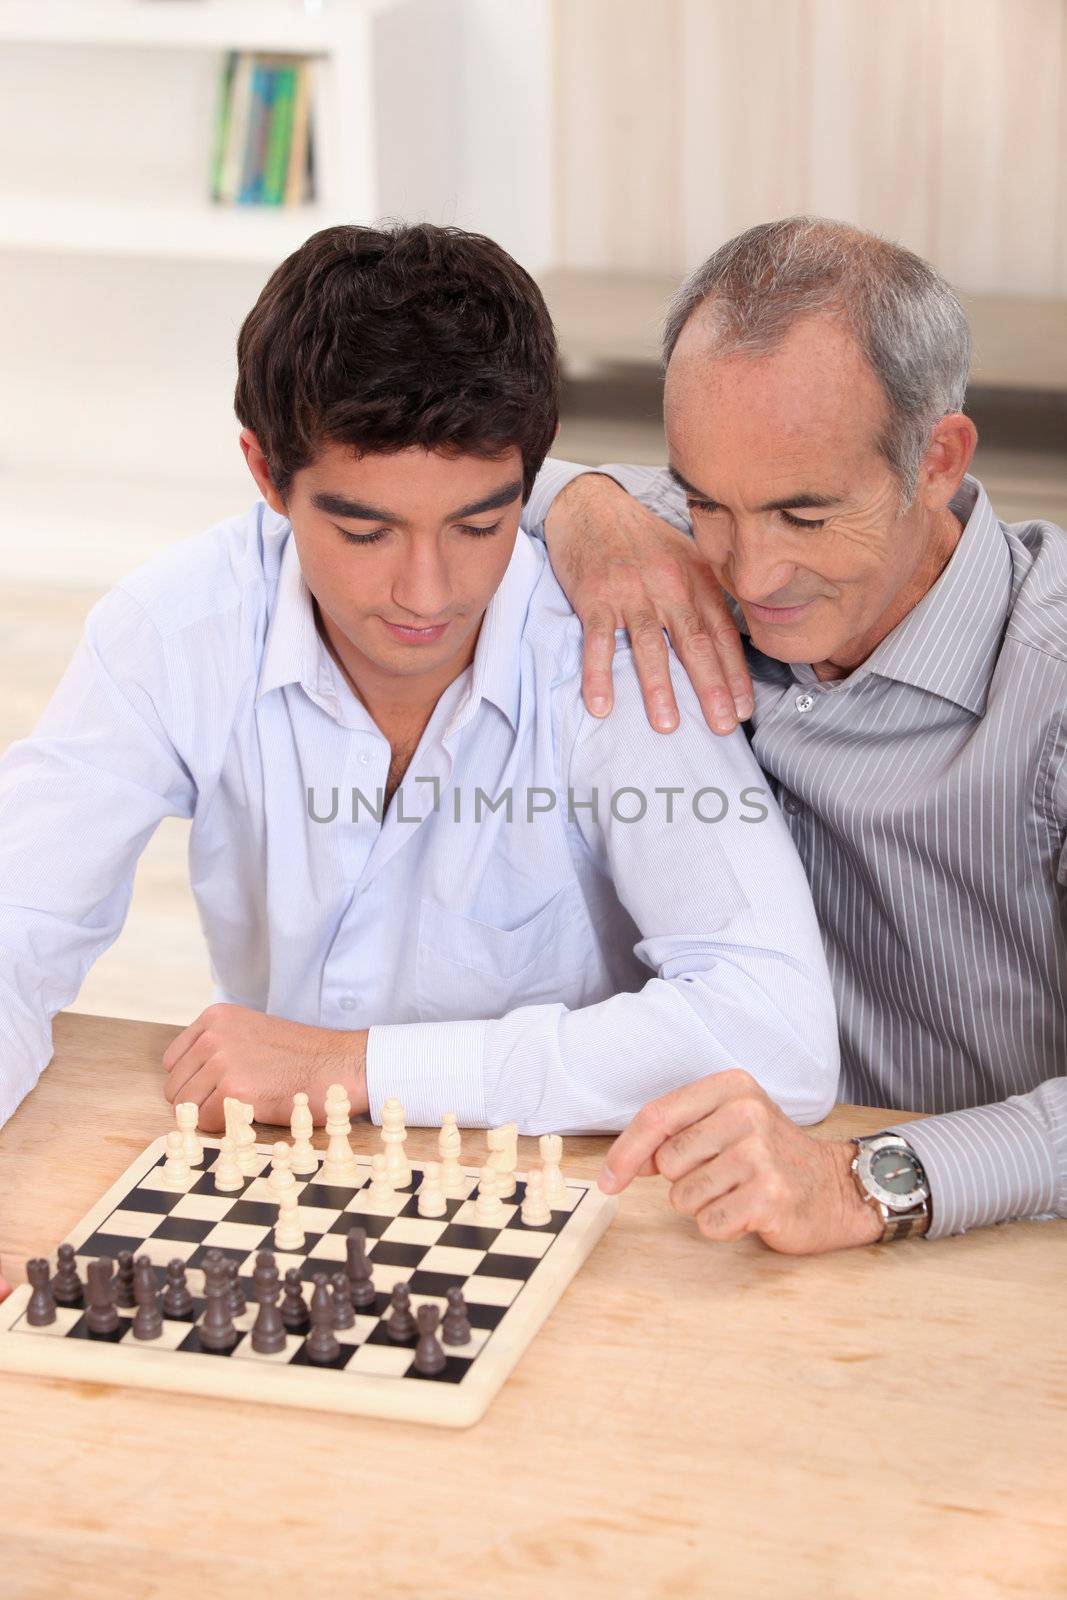 Father and son playing chess by phovoir